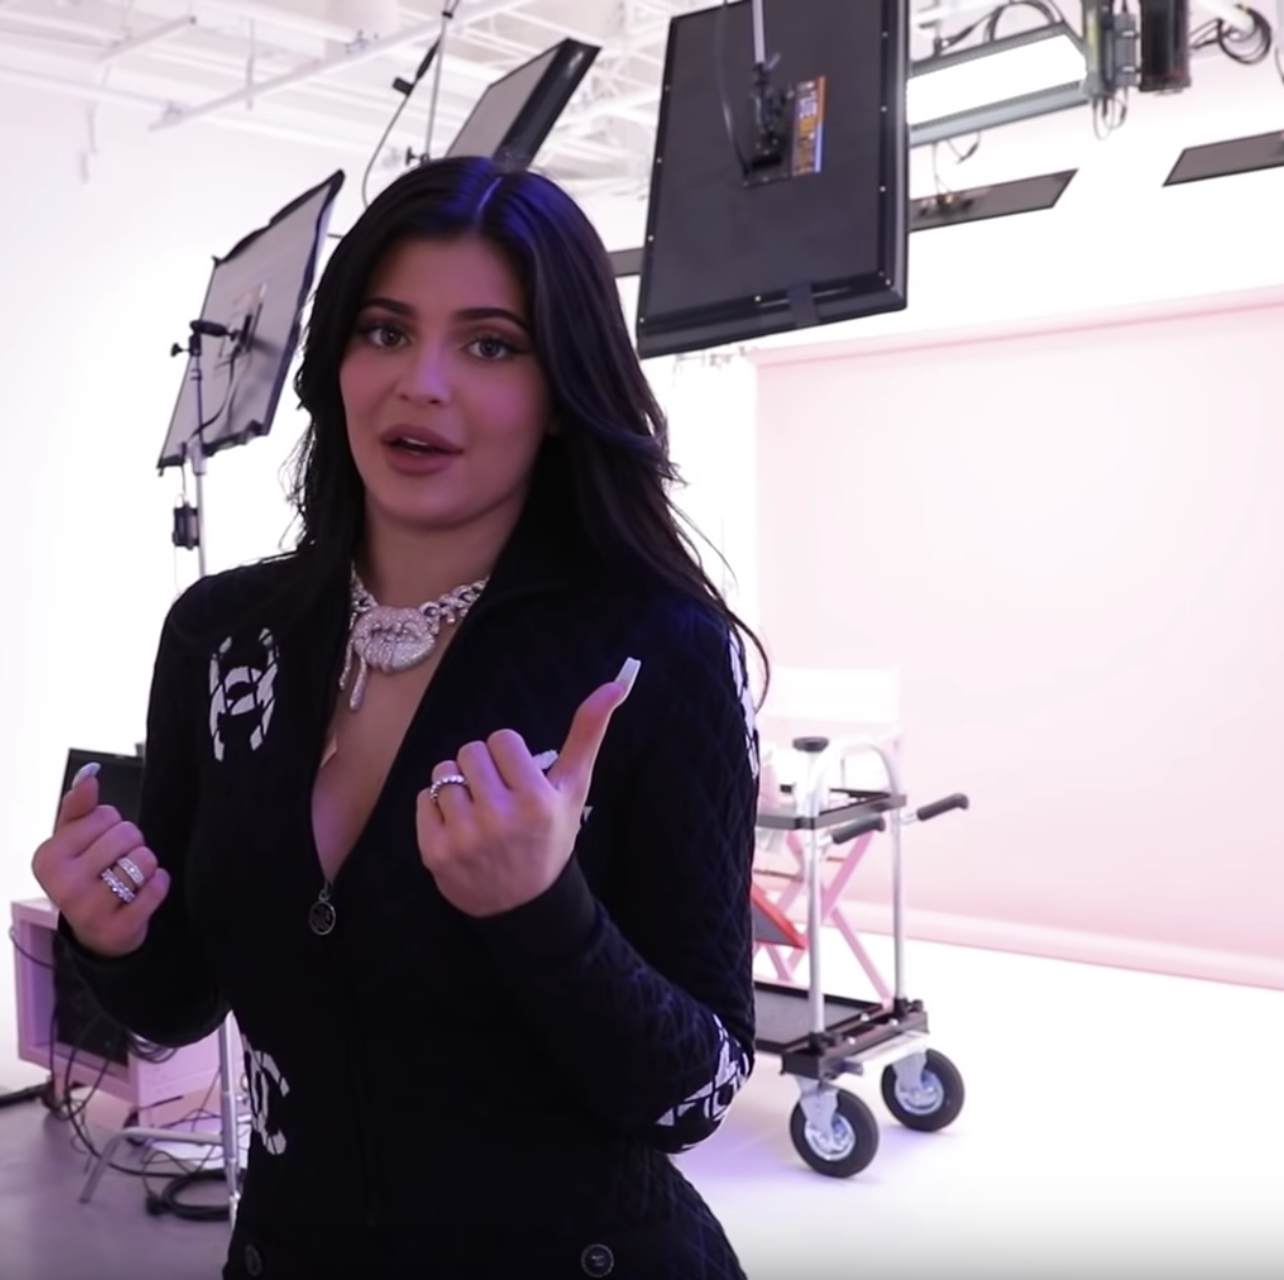 Kylie Jenner Filmed A Tour Of The Kylie Cosmetics Office And